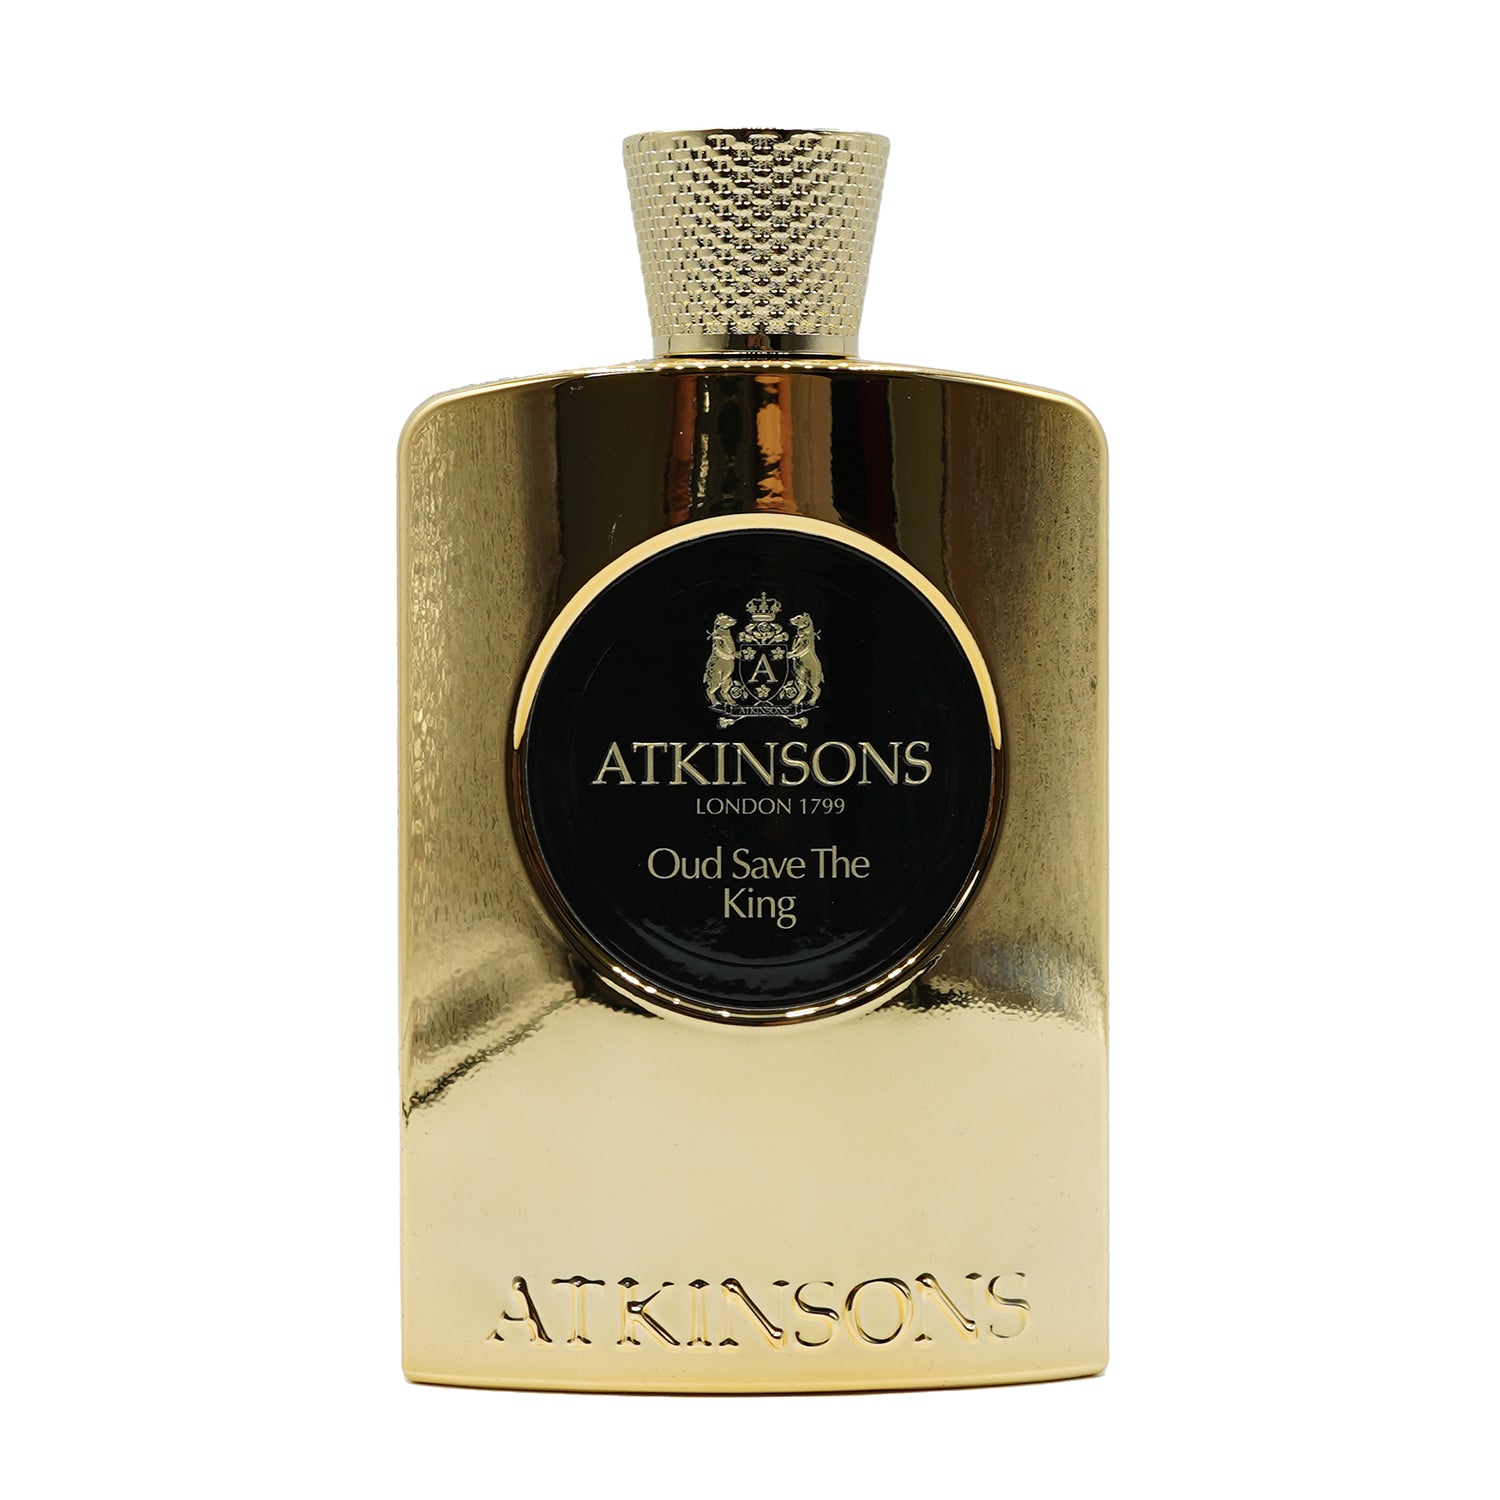 Atkinsons | Oud Save The King Abfüllung